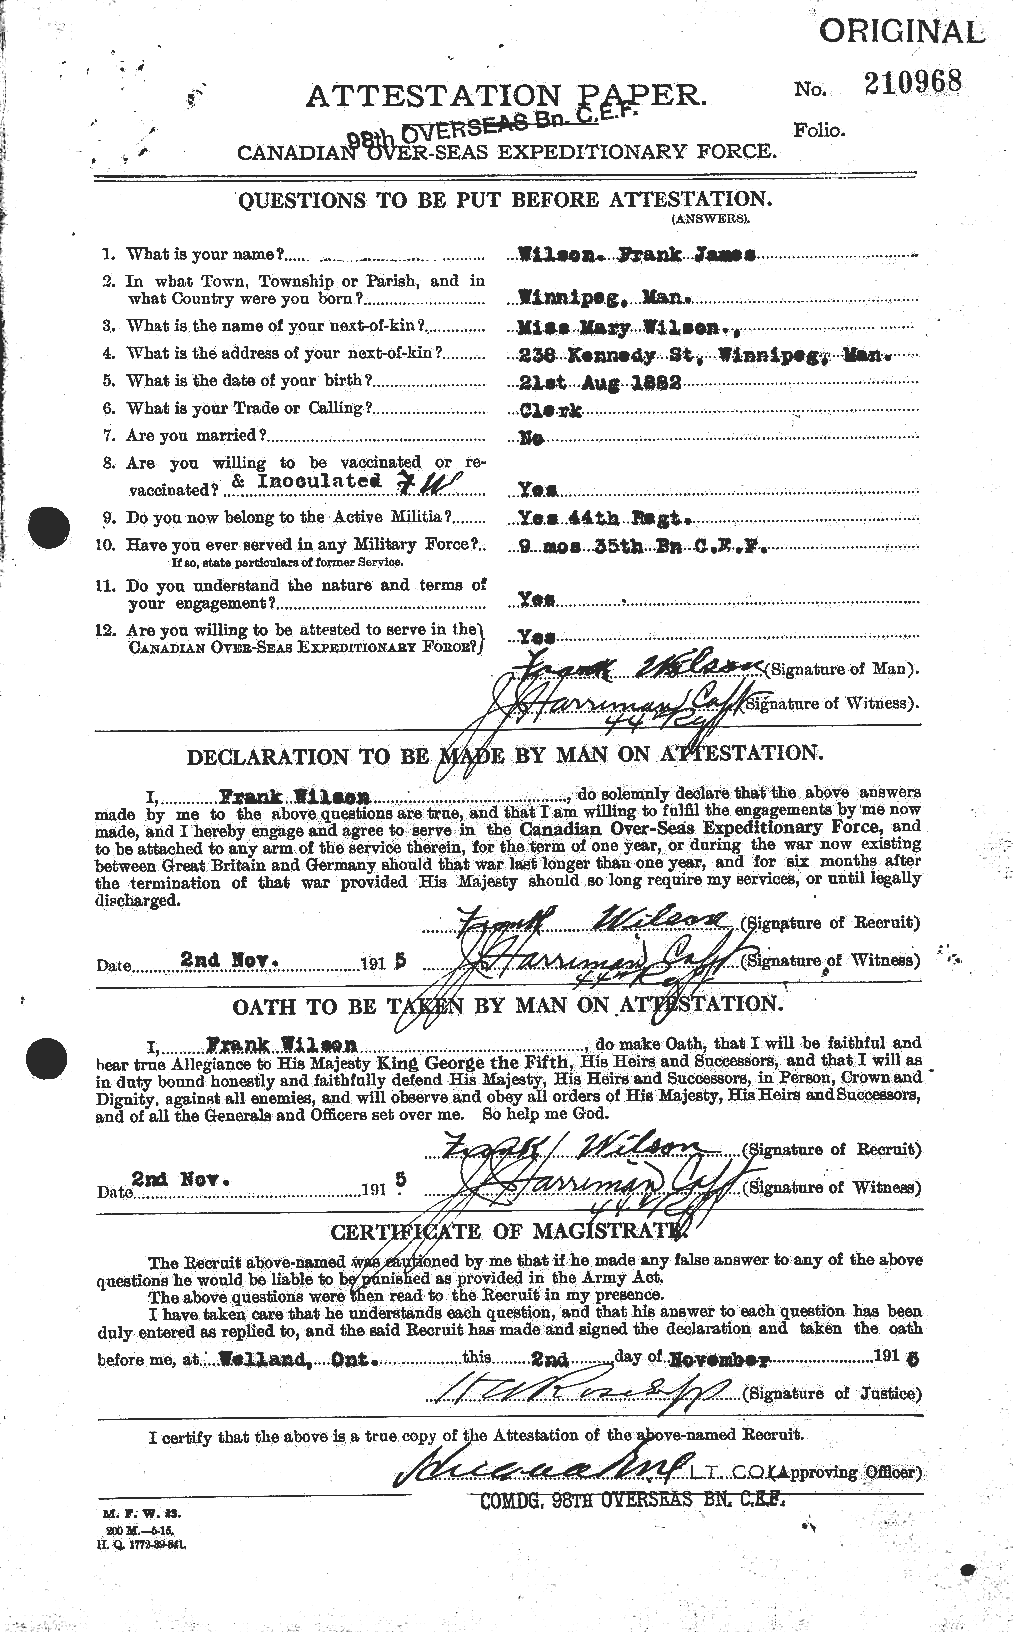 Personnel Records of the First World War - CEF 680676a